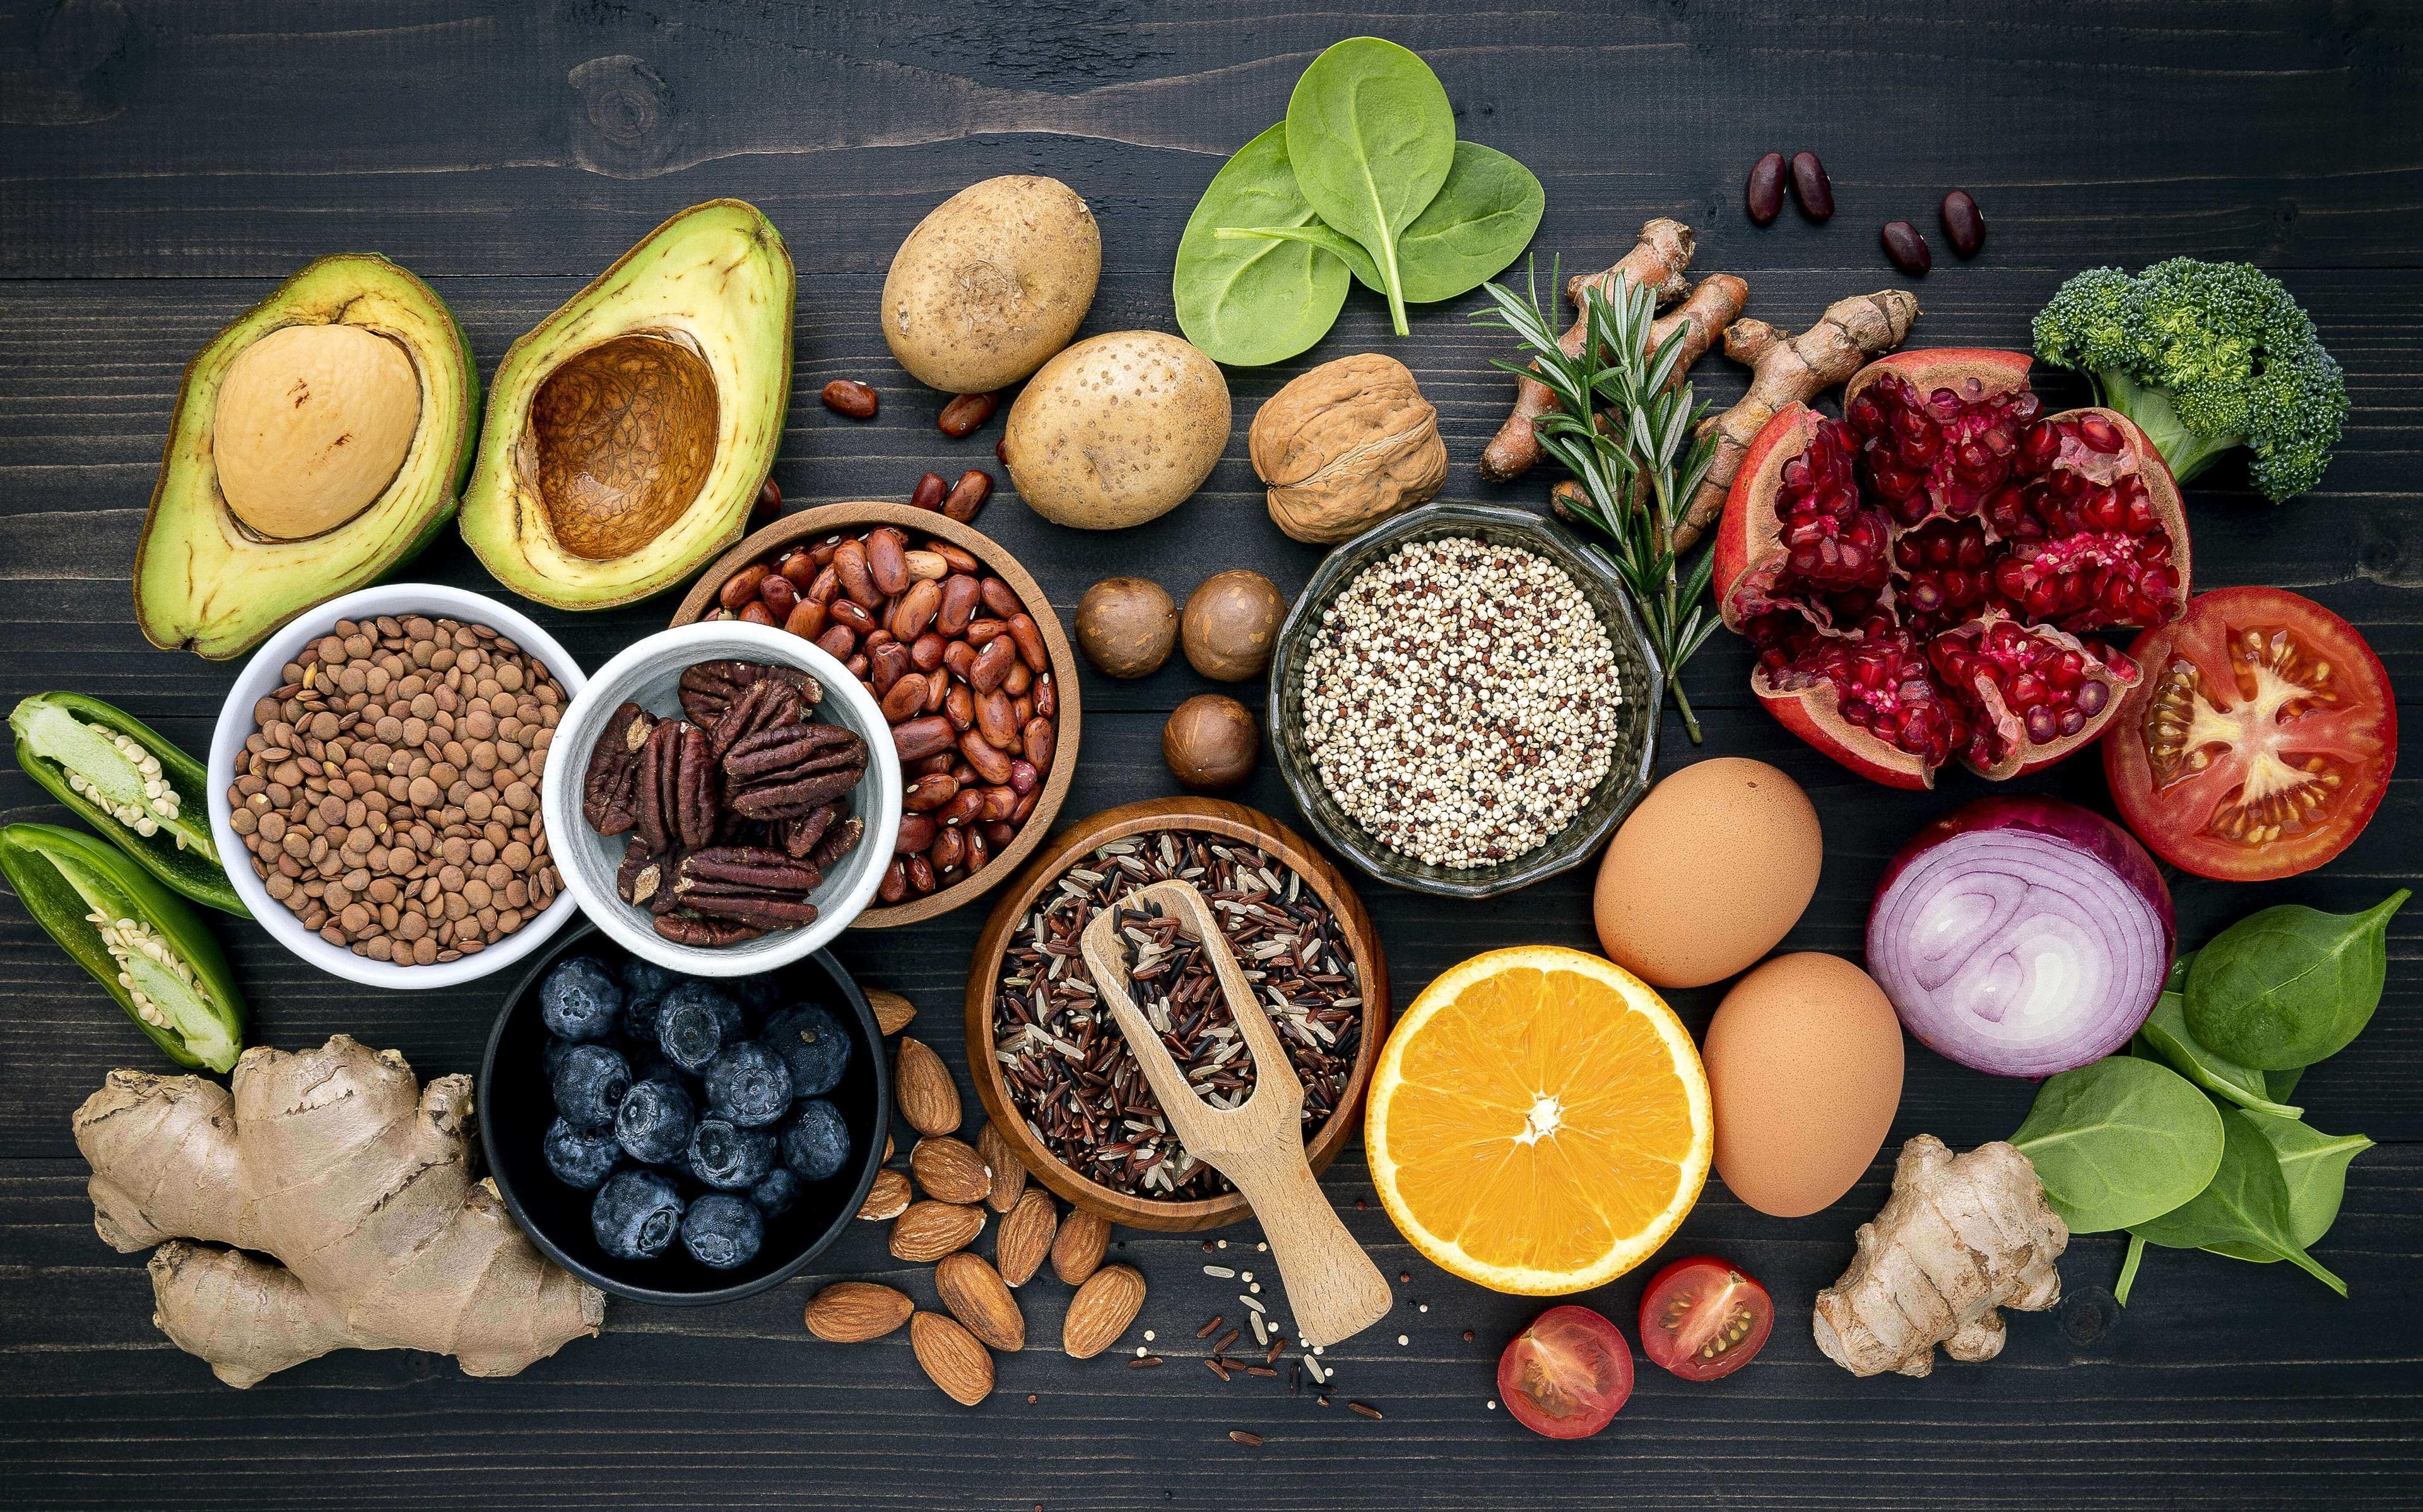 Top 20 Superfoods That Can Help Boost Immunity